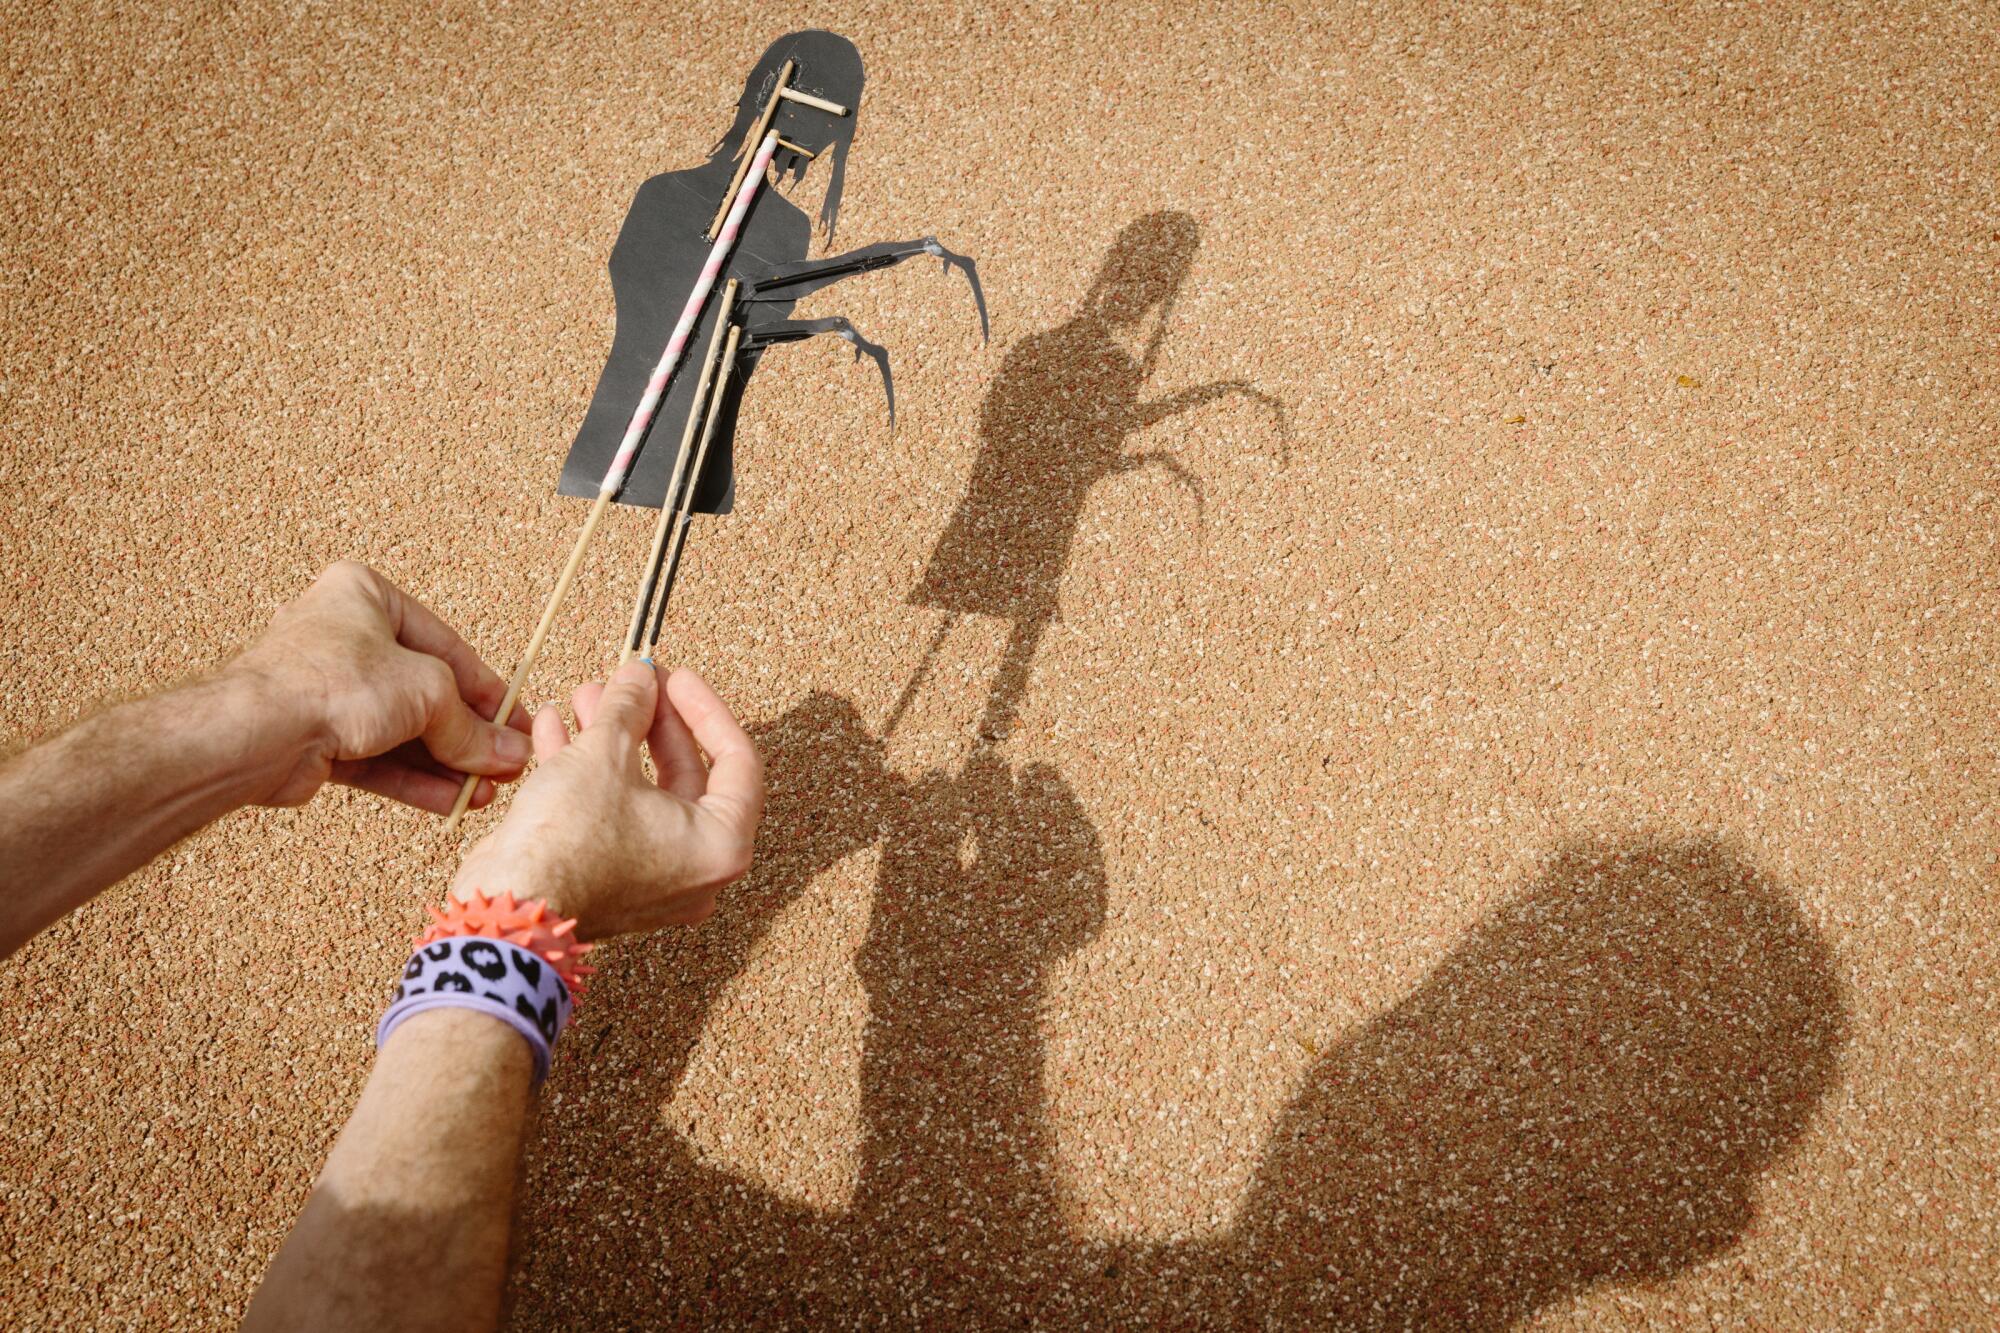 A shadow puppet is manipulated, with its shadow in the background.